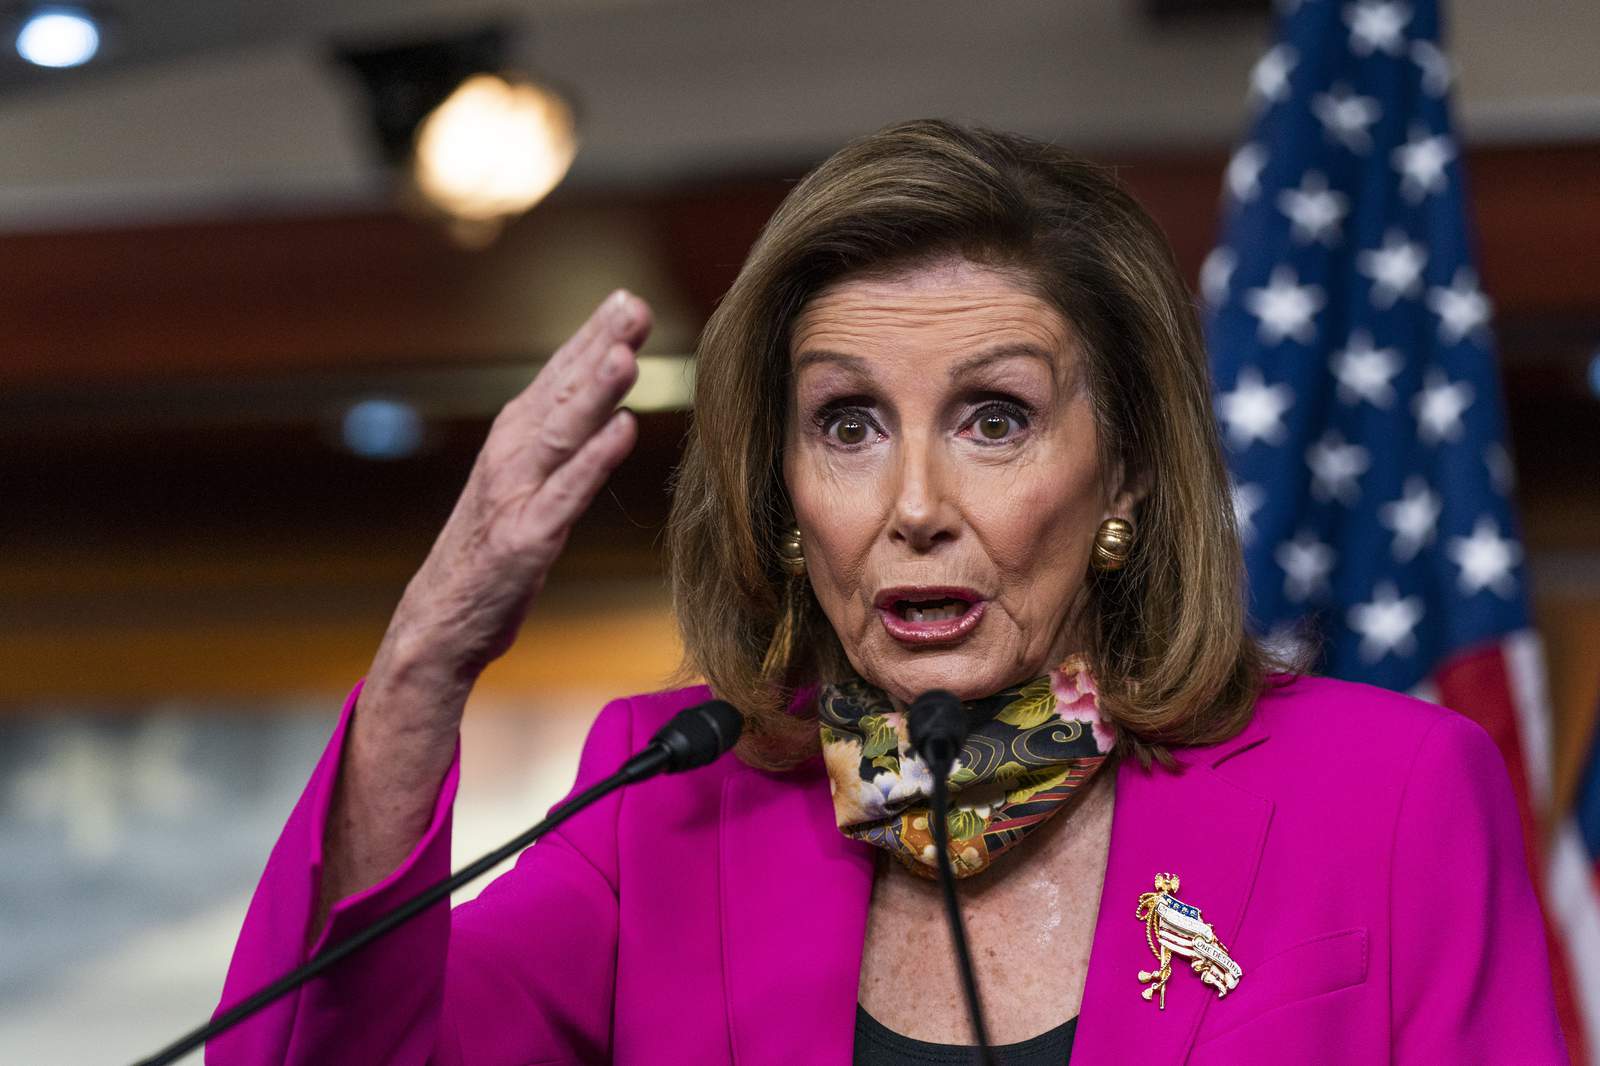 Pelosi to church: ‘Follow science’ on COVID-19 restrictions